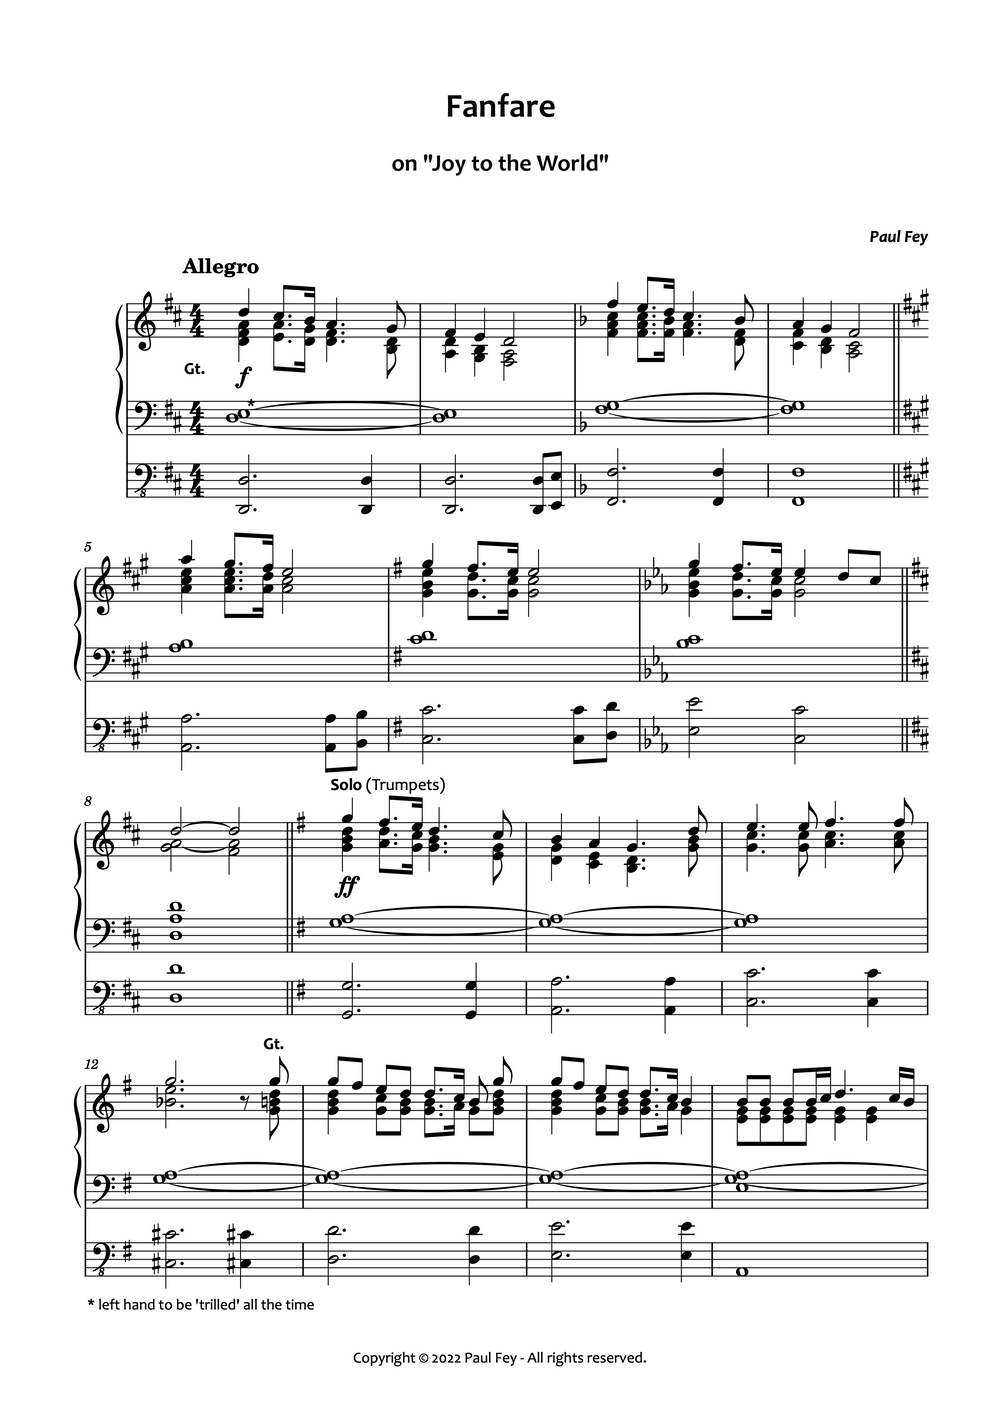 Fanfare on "Joy to the World" (Sheet Music) - Music for Organ